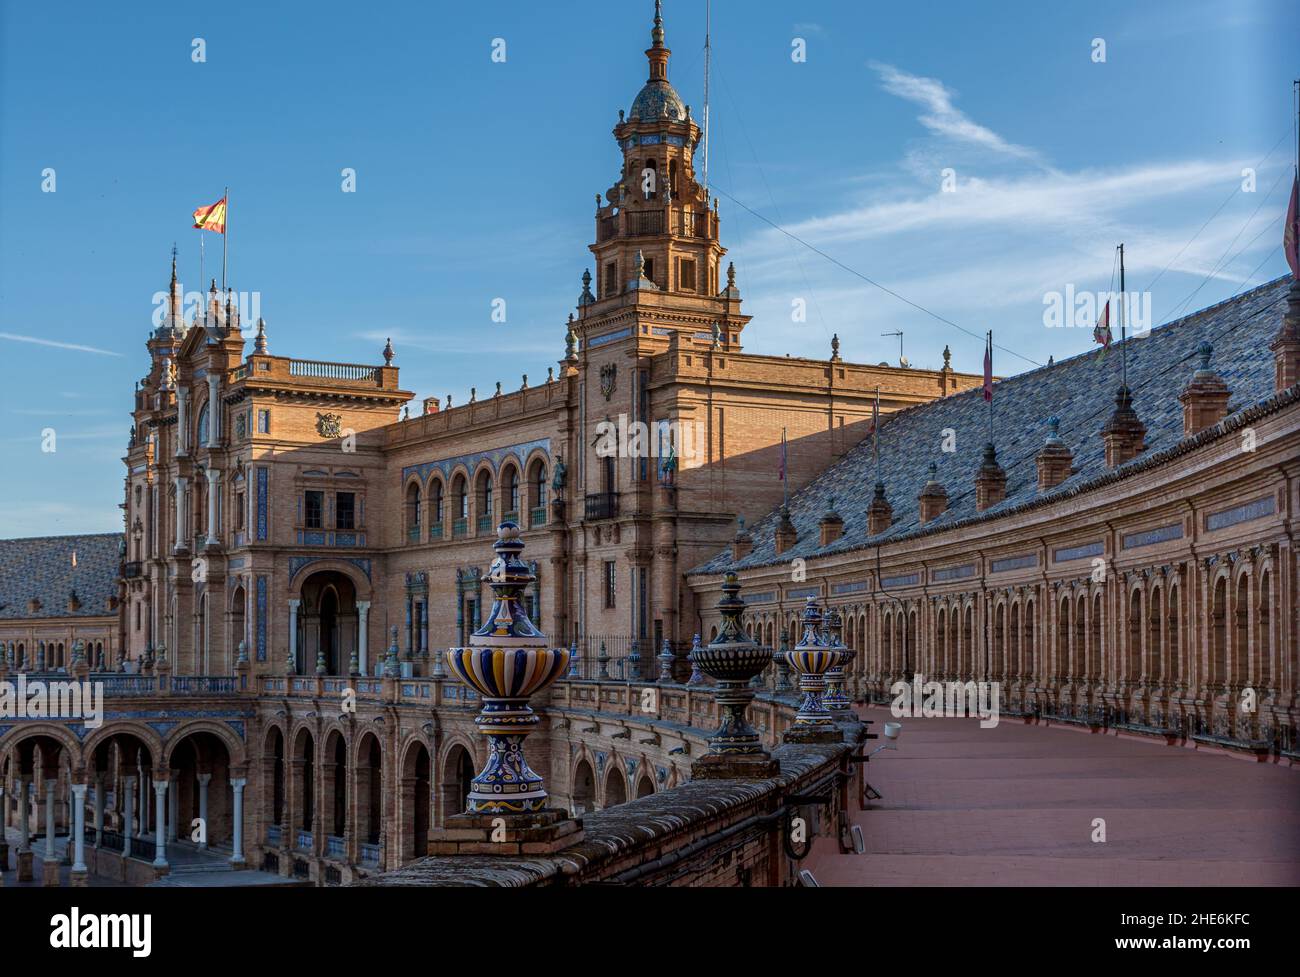 The beautiful Plaza de Espana (translates to Spanish Square) in Seville, with the ornately decorated archways Stock Photo